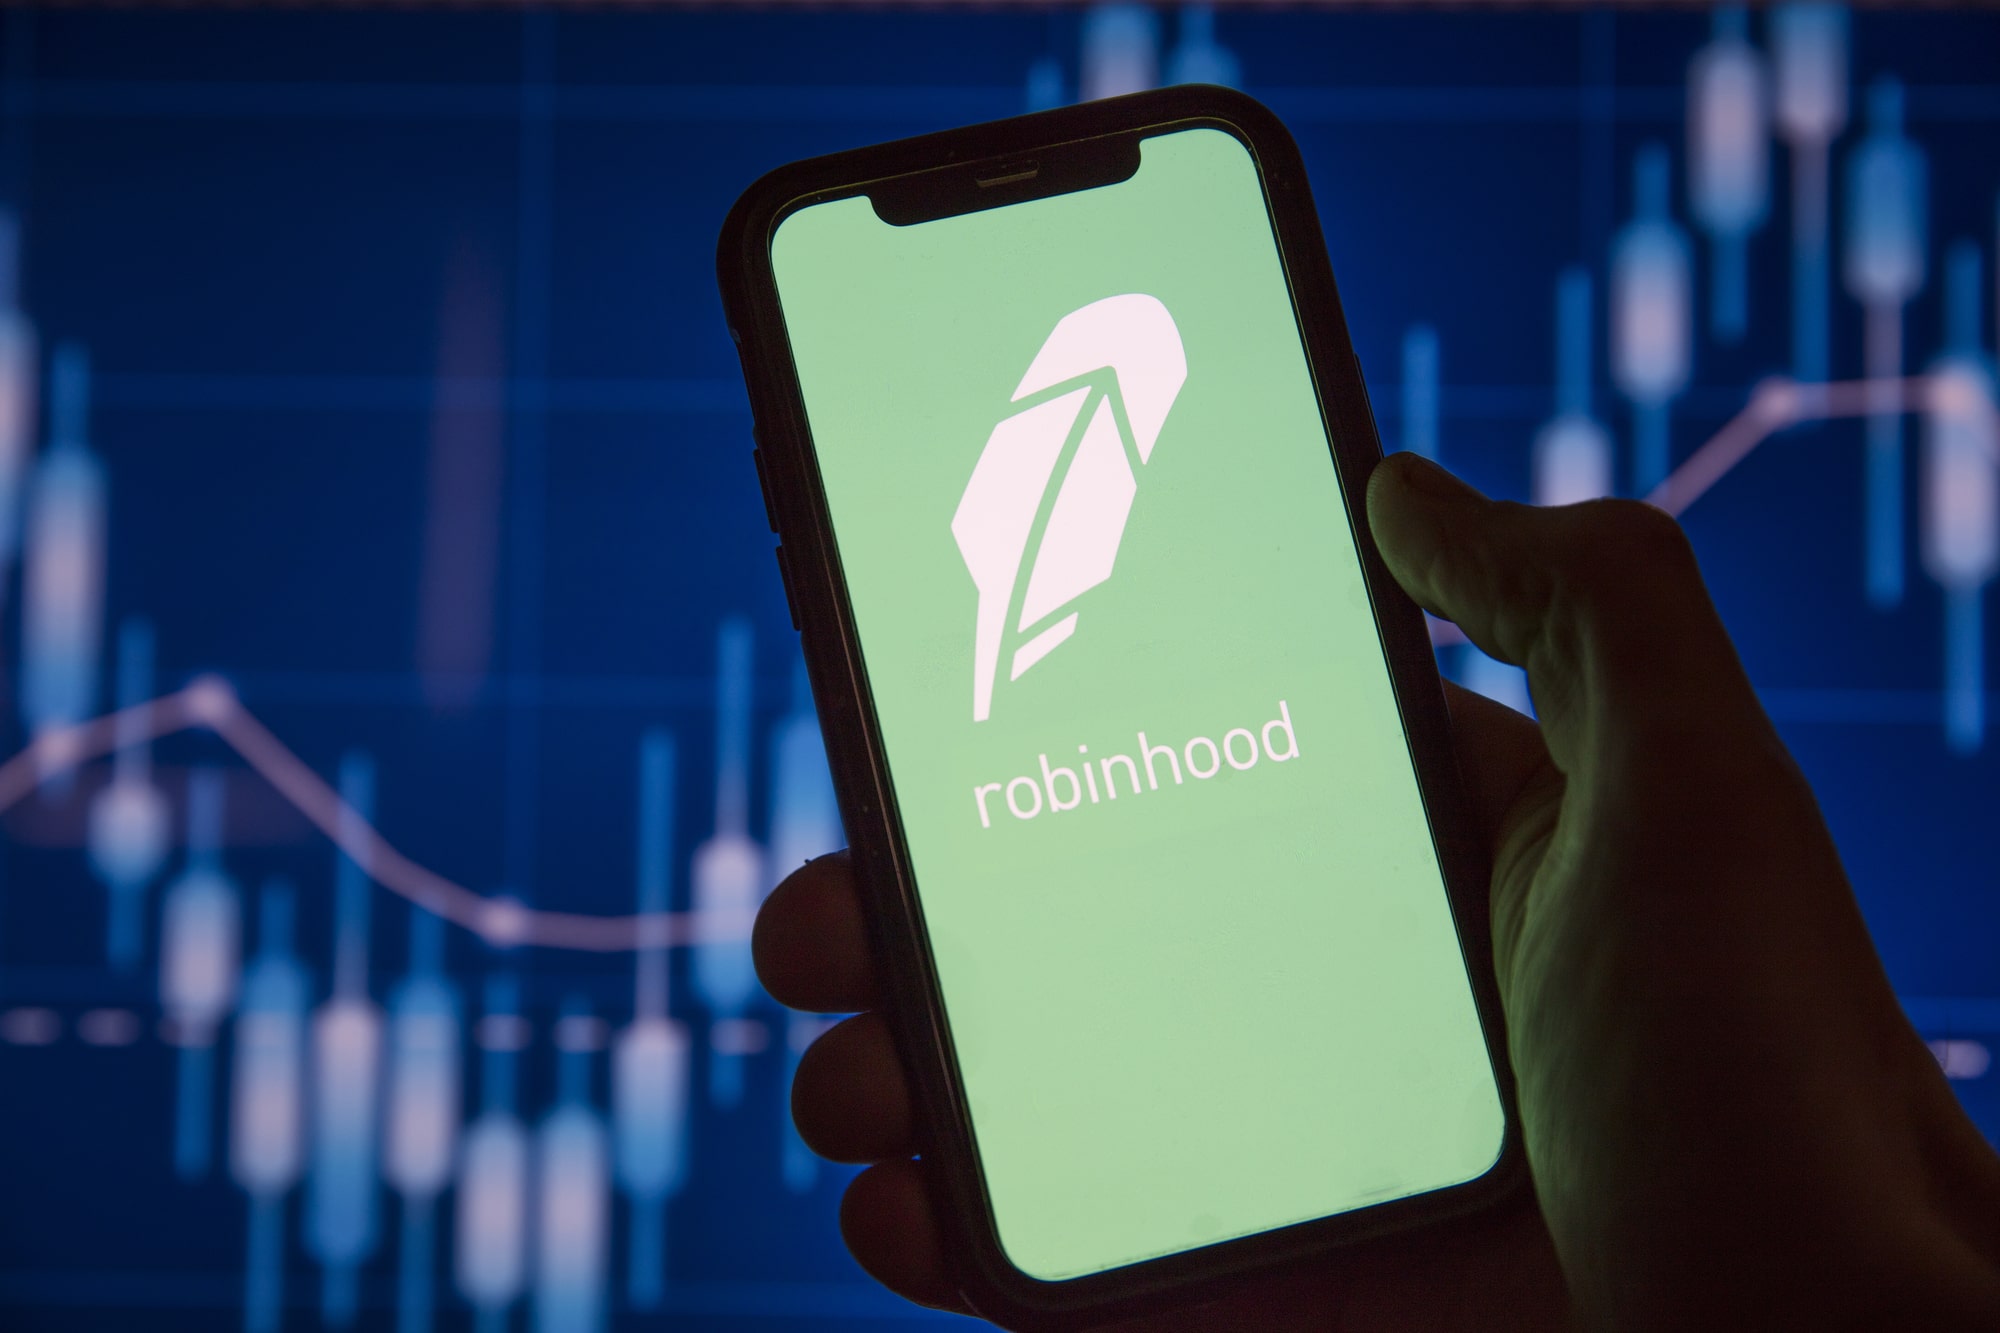 Robinhood anticipates the lower revenue, as crypto trading is slowing down